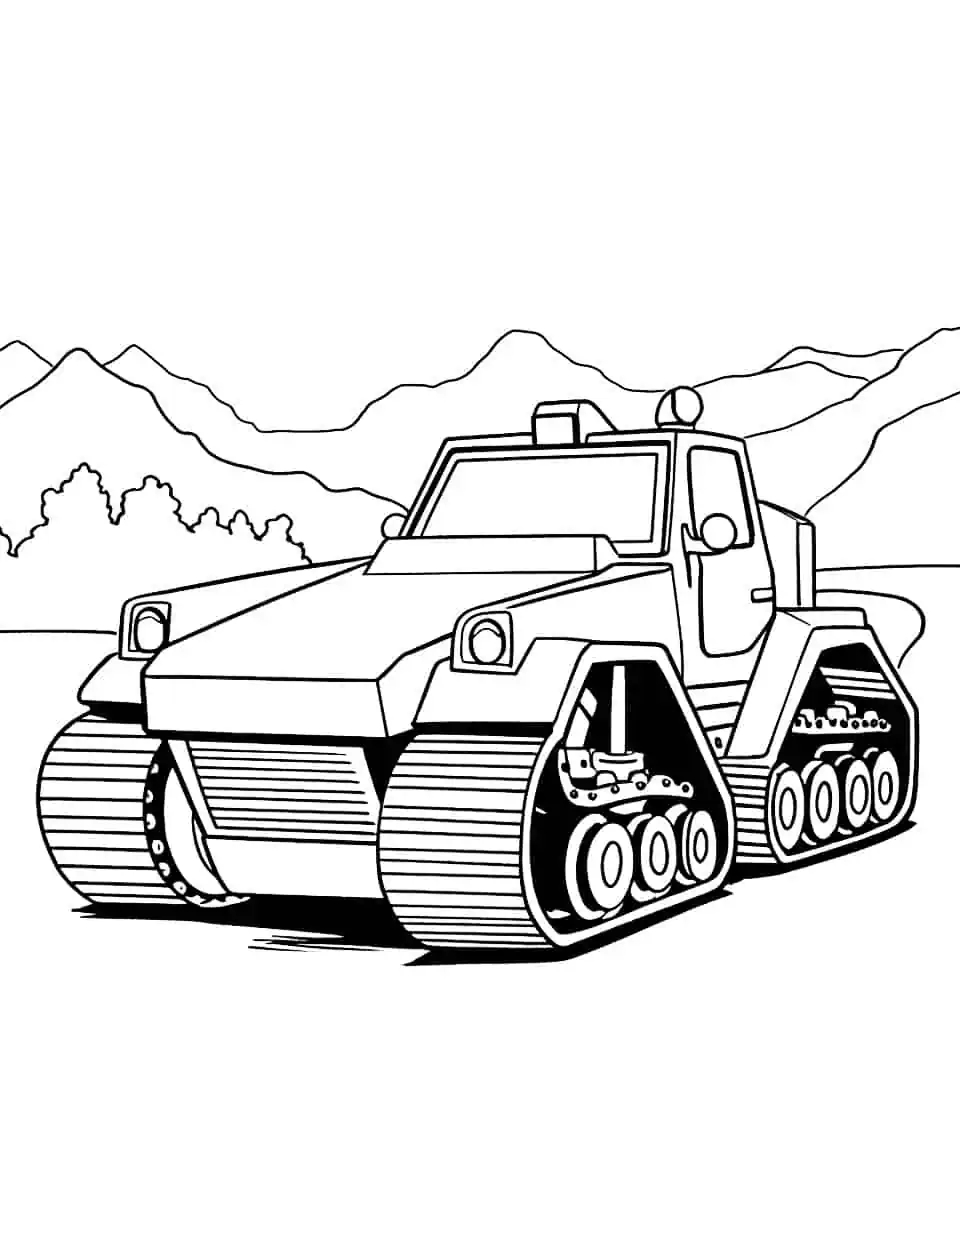 Large Bulldozer Car Coloring Page - A large bulldozer at work, ready to be colored.